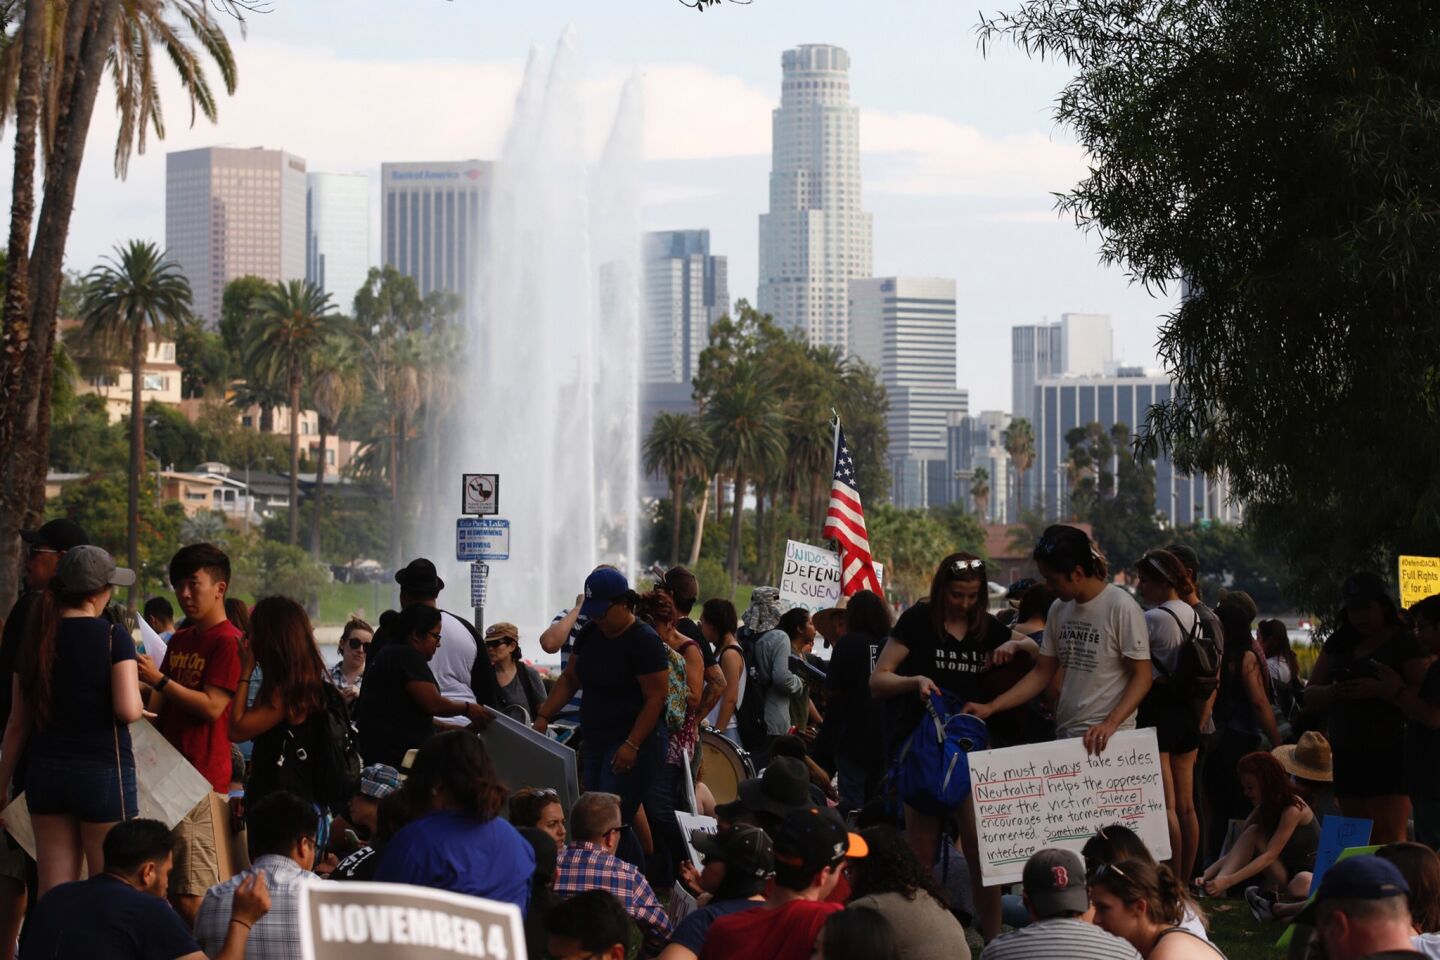 Participants in the DACA march gather at Echo Park Lake in Los Angeles.